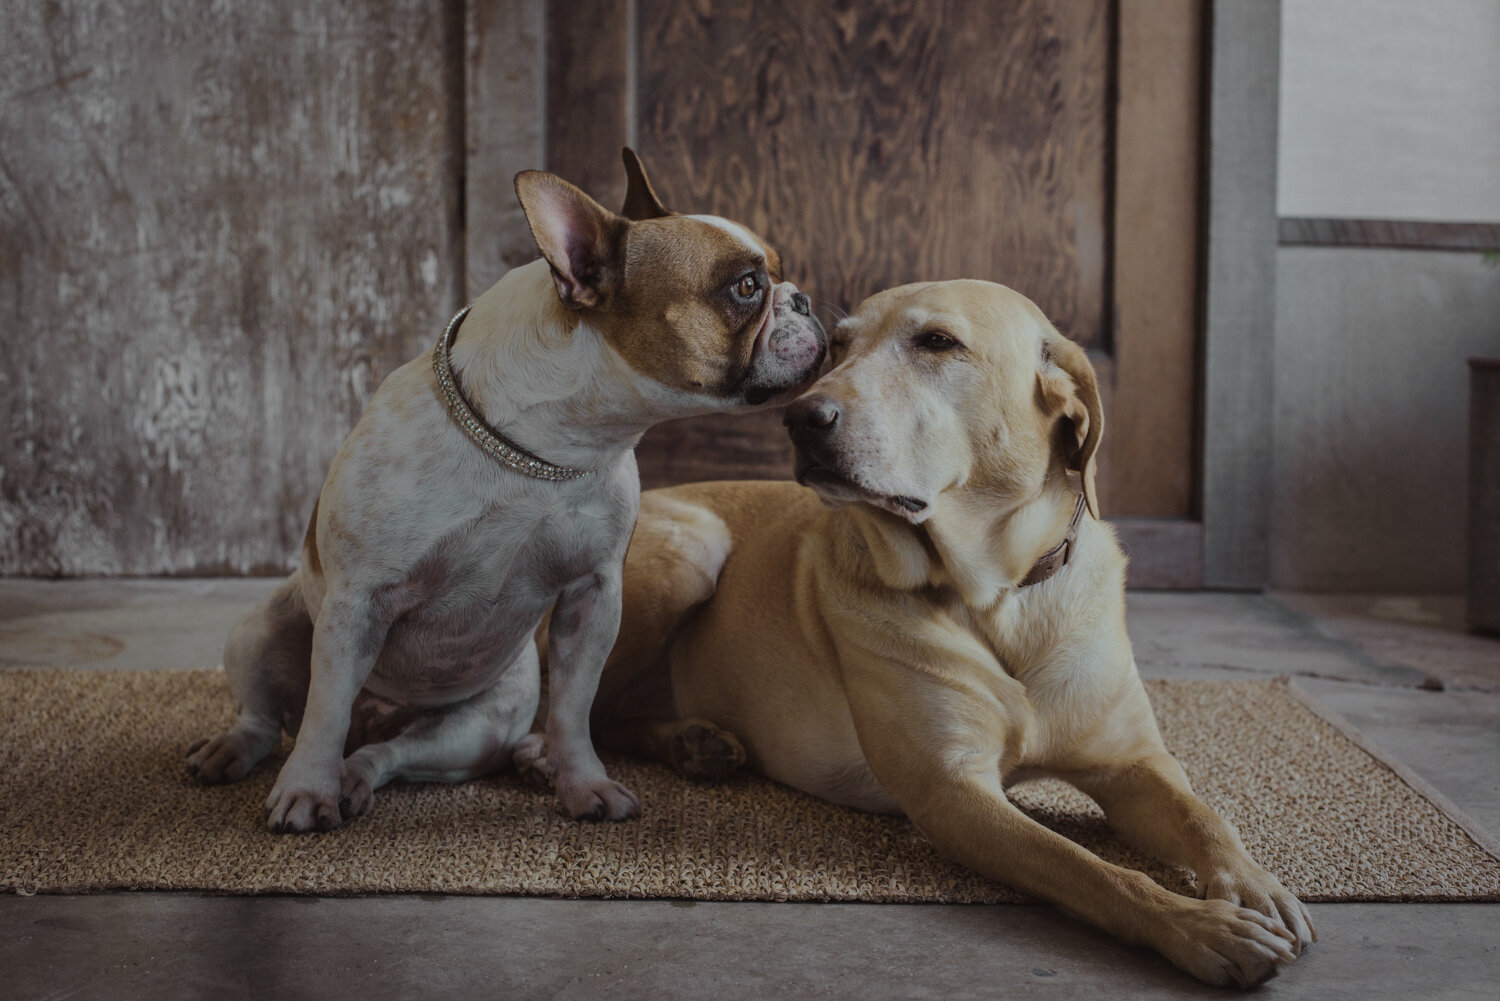  Two sweet dogs give each other a dog kiss as they rest peacefully during a tender moment in the pet portrait studio belonging to Kathryn Learie. 